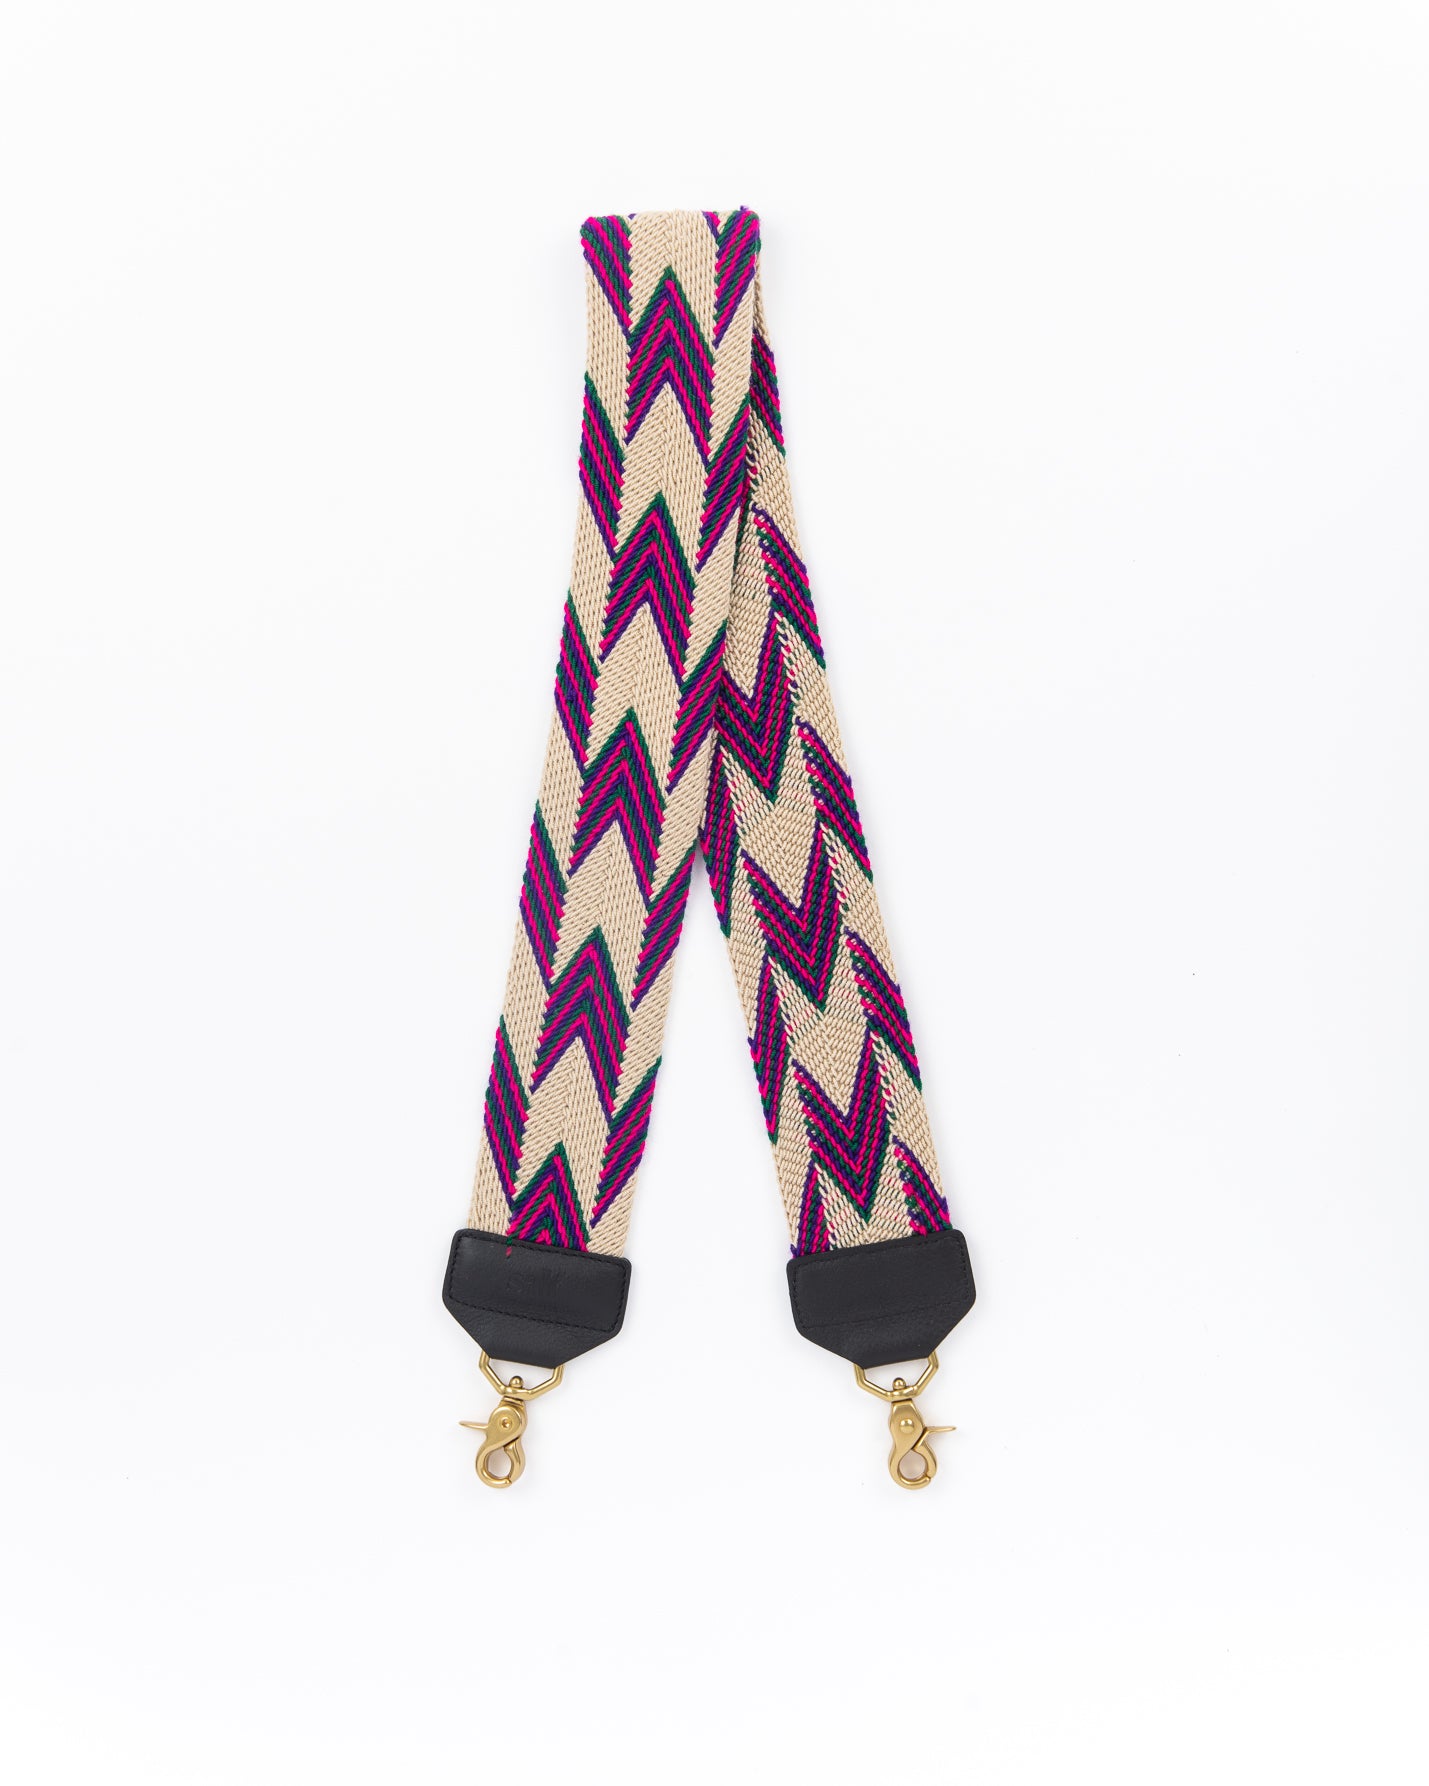 Wondering where to buy a replacement purse strap? The Salt strap is a  handwoven bag strap that can be attached to any purse.